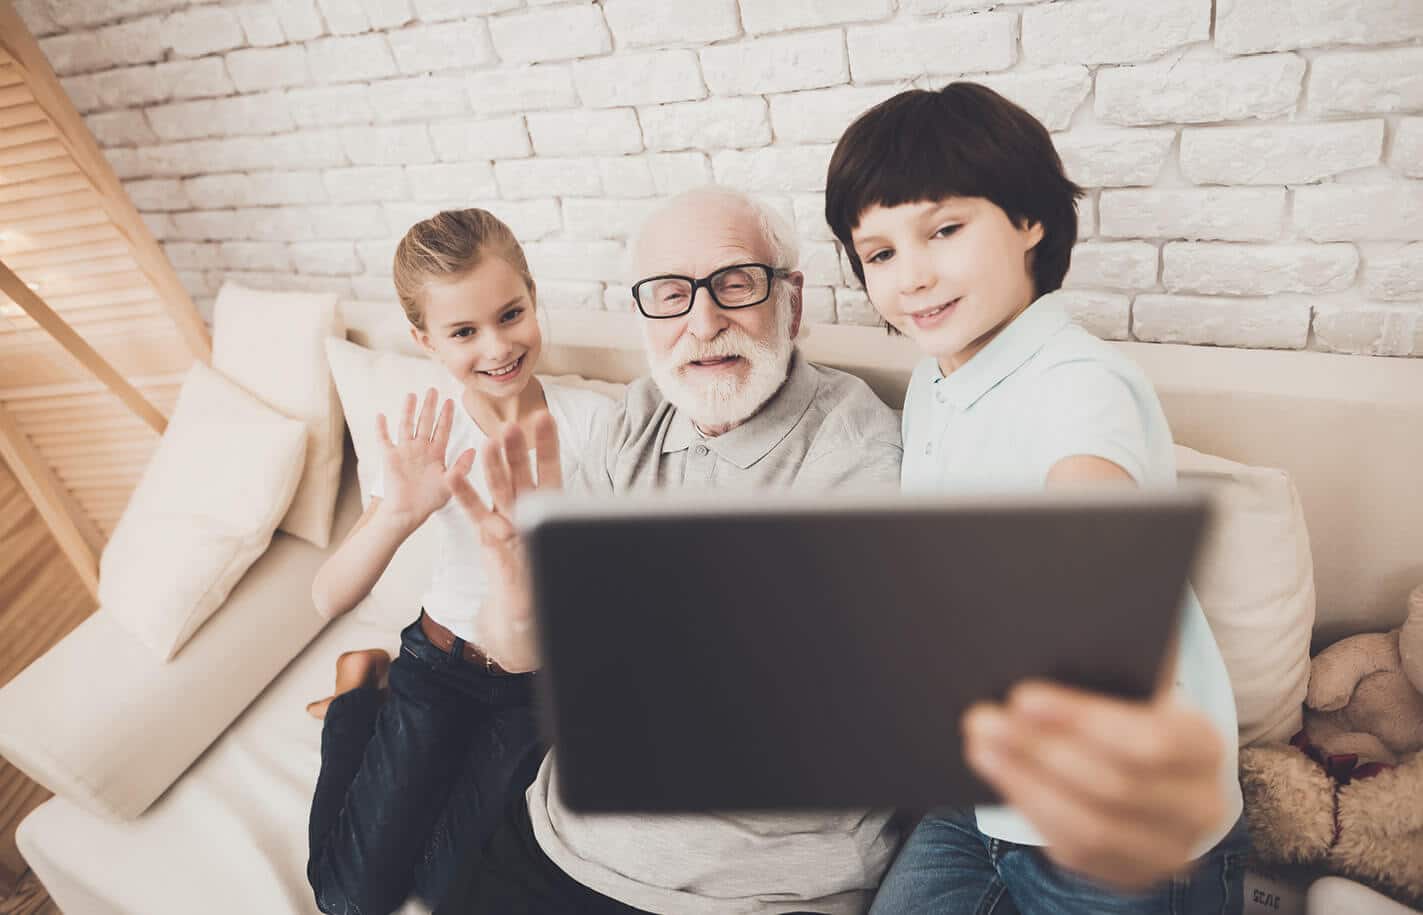 Senior man wearing black glasses sitting on a couch with a young boy and girl waving at a tablet